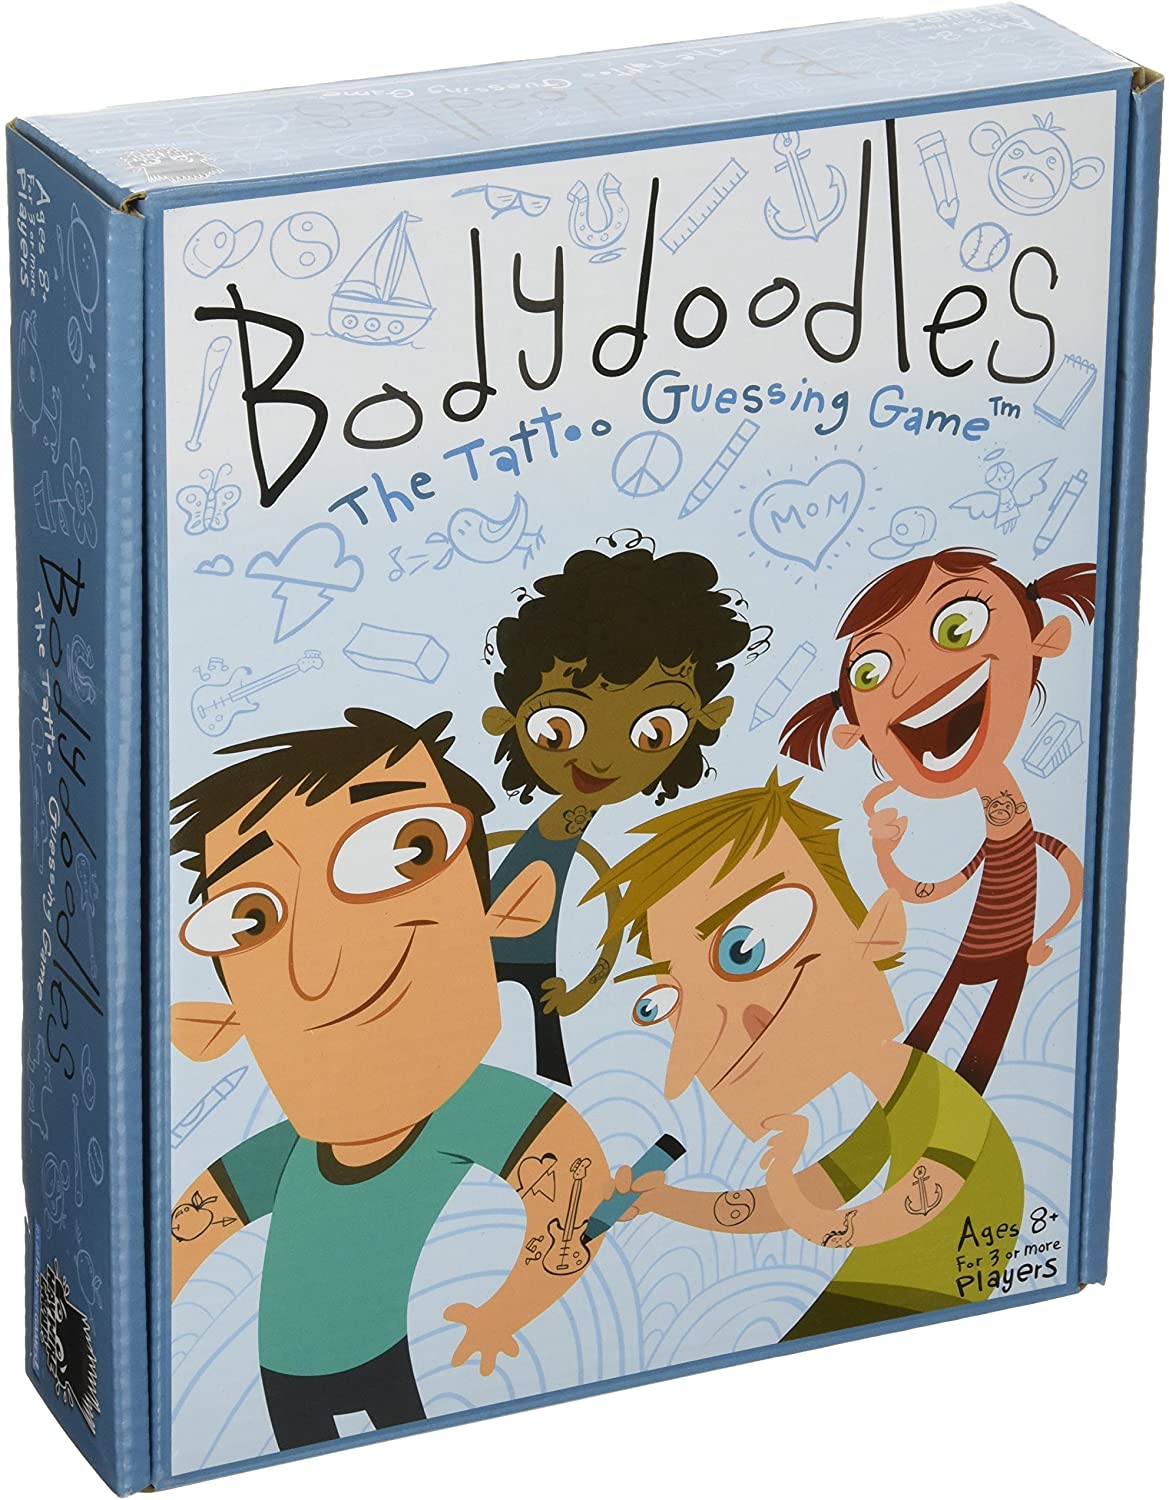 Bodydoodles The Tattoo Guessing Game